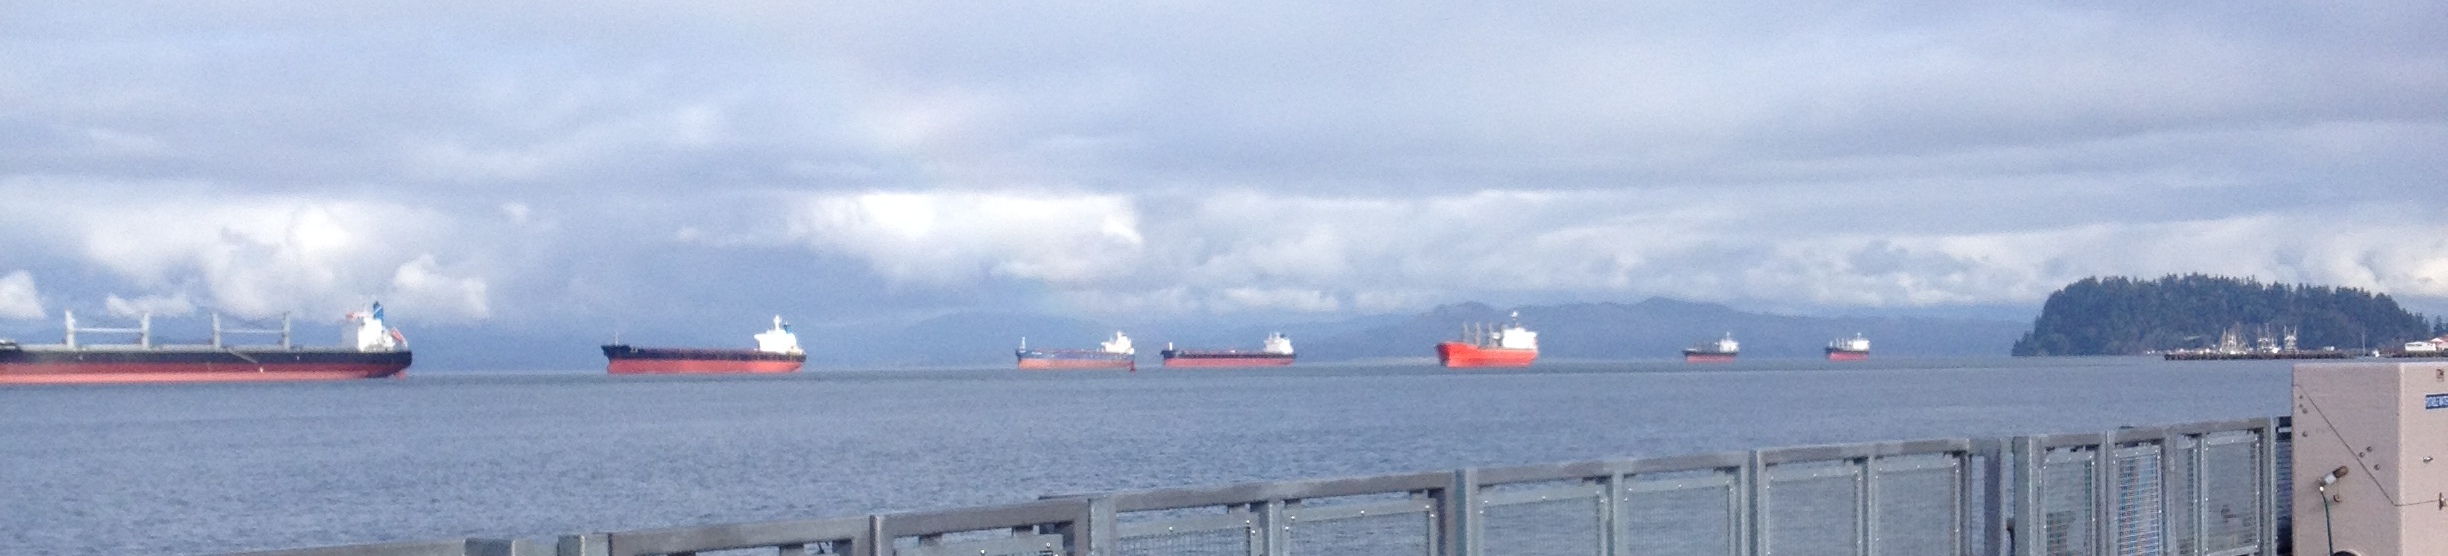 Ships on the lower Columbia River near Astoria